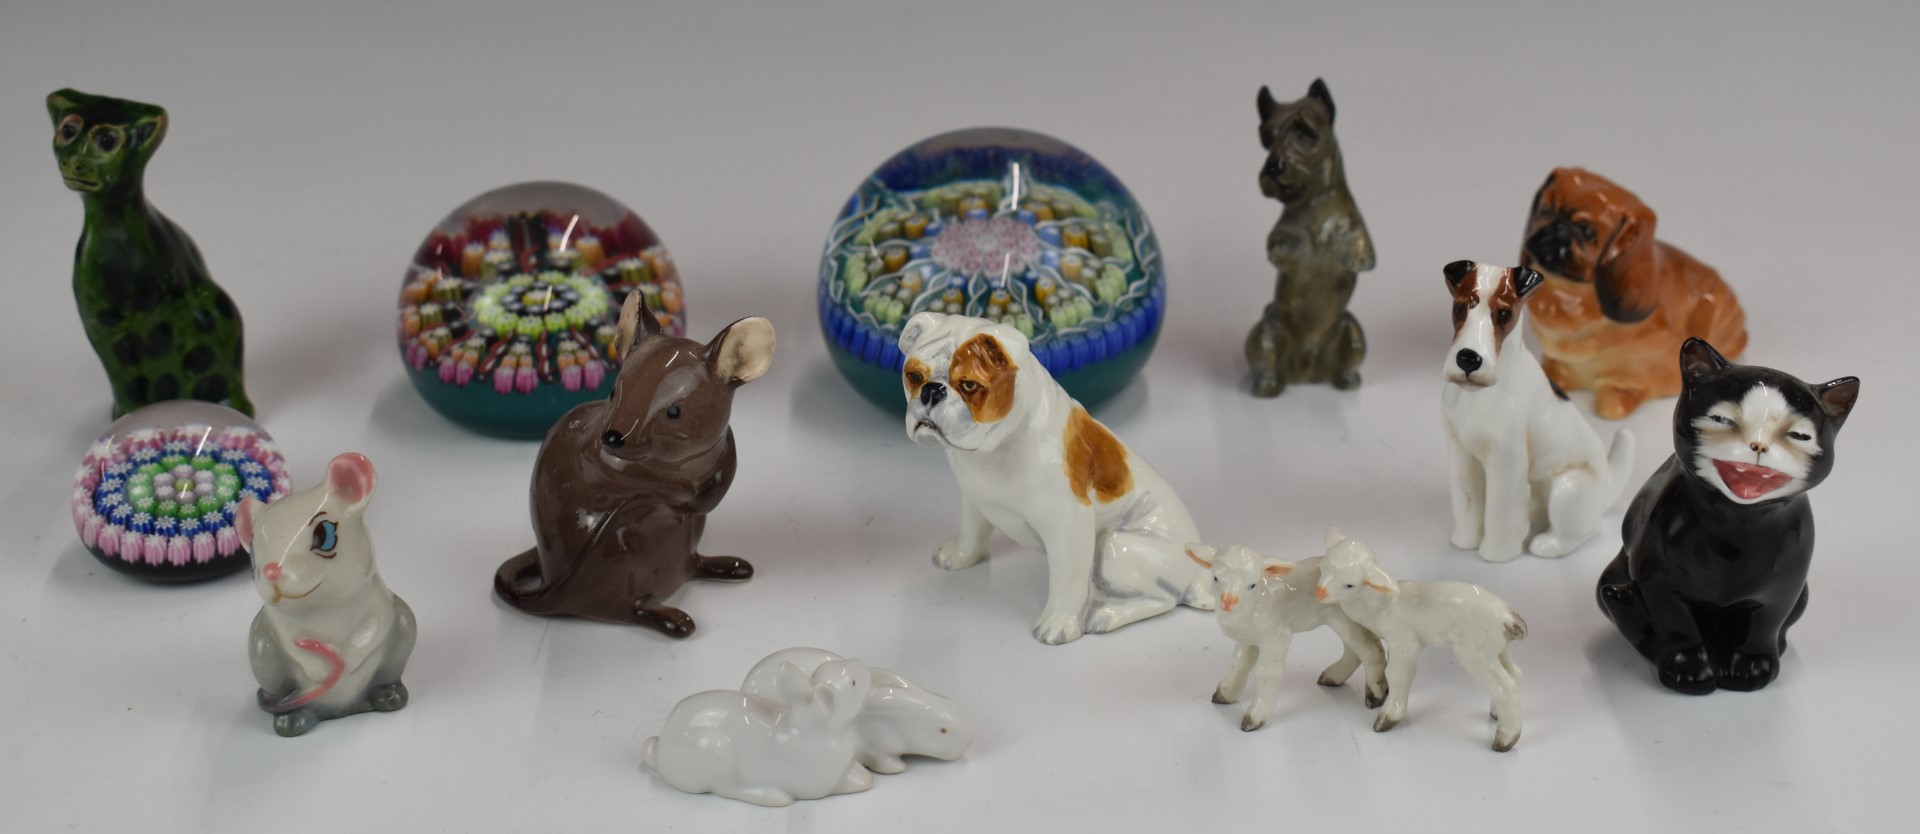 Beswick, Royal Worcester, Bing & Grondahl and Royal Doulton animal figures and three Perthshire